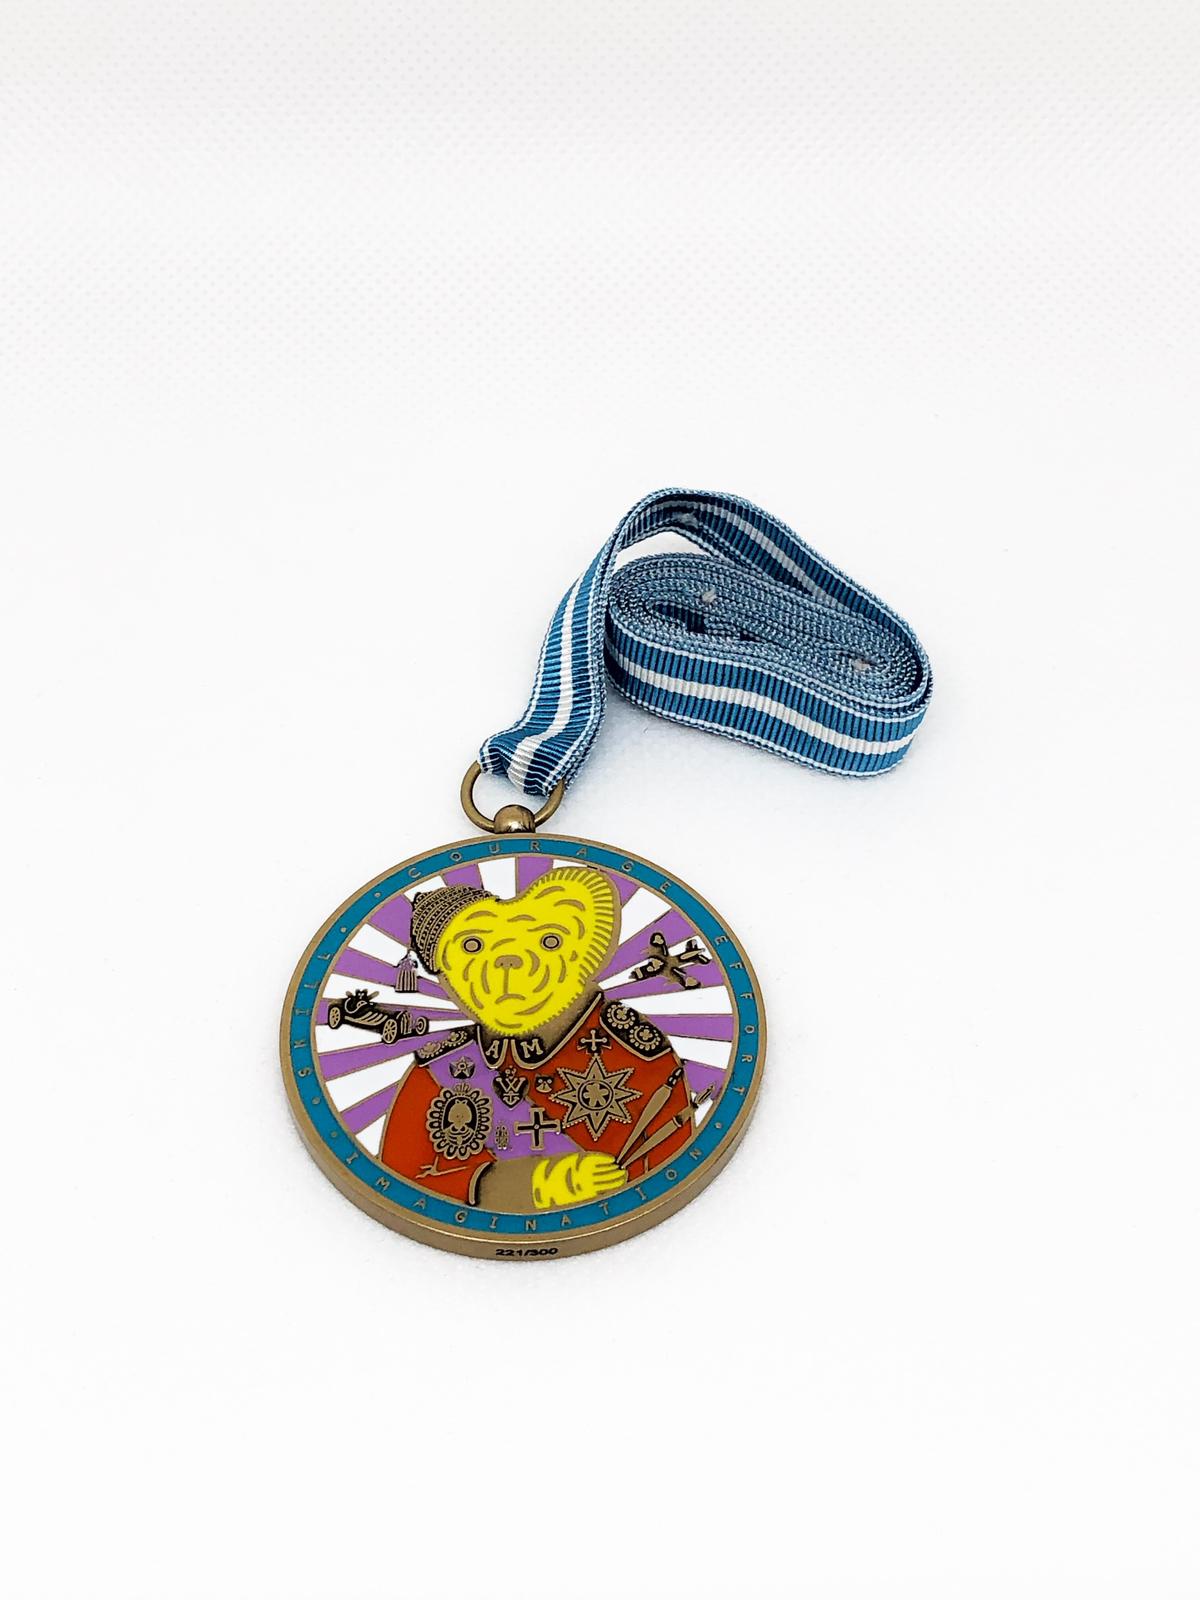 Grayson Perry Bronze Medal alan measles limited edition